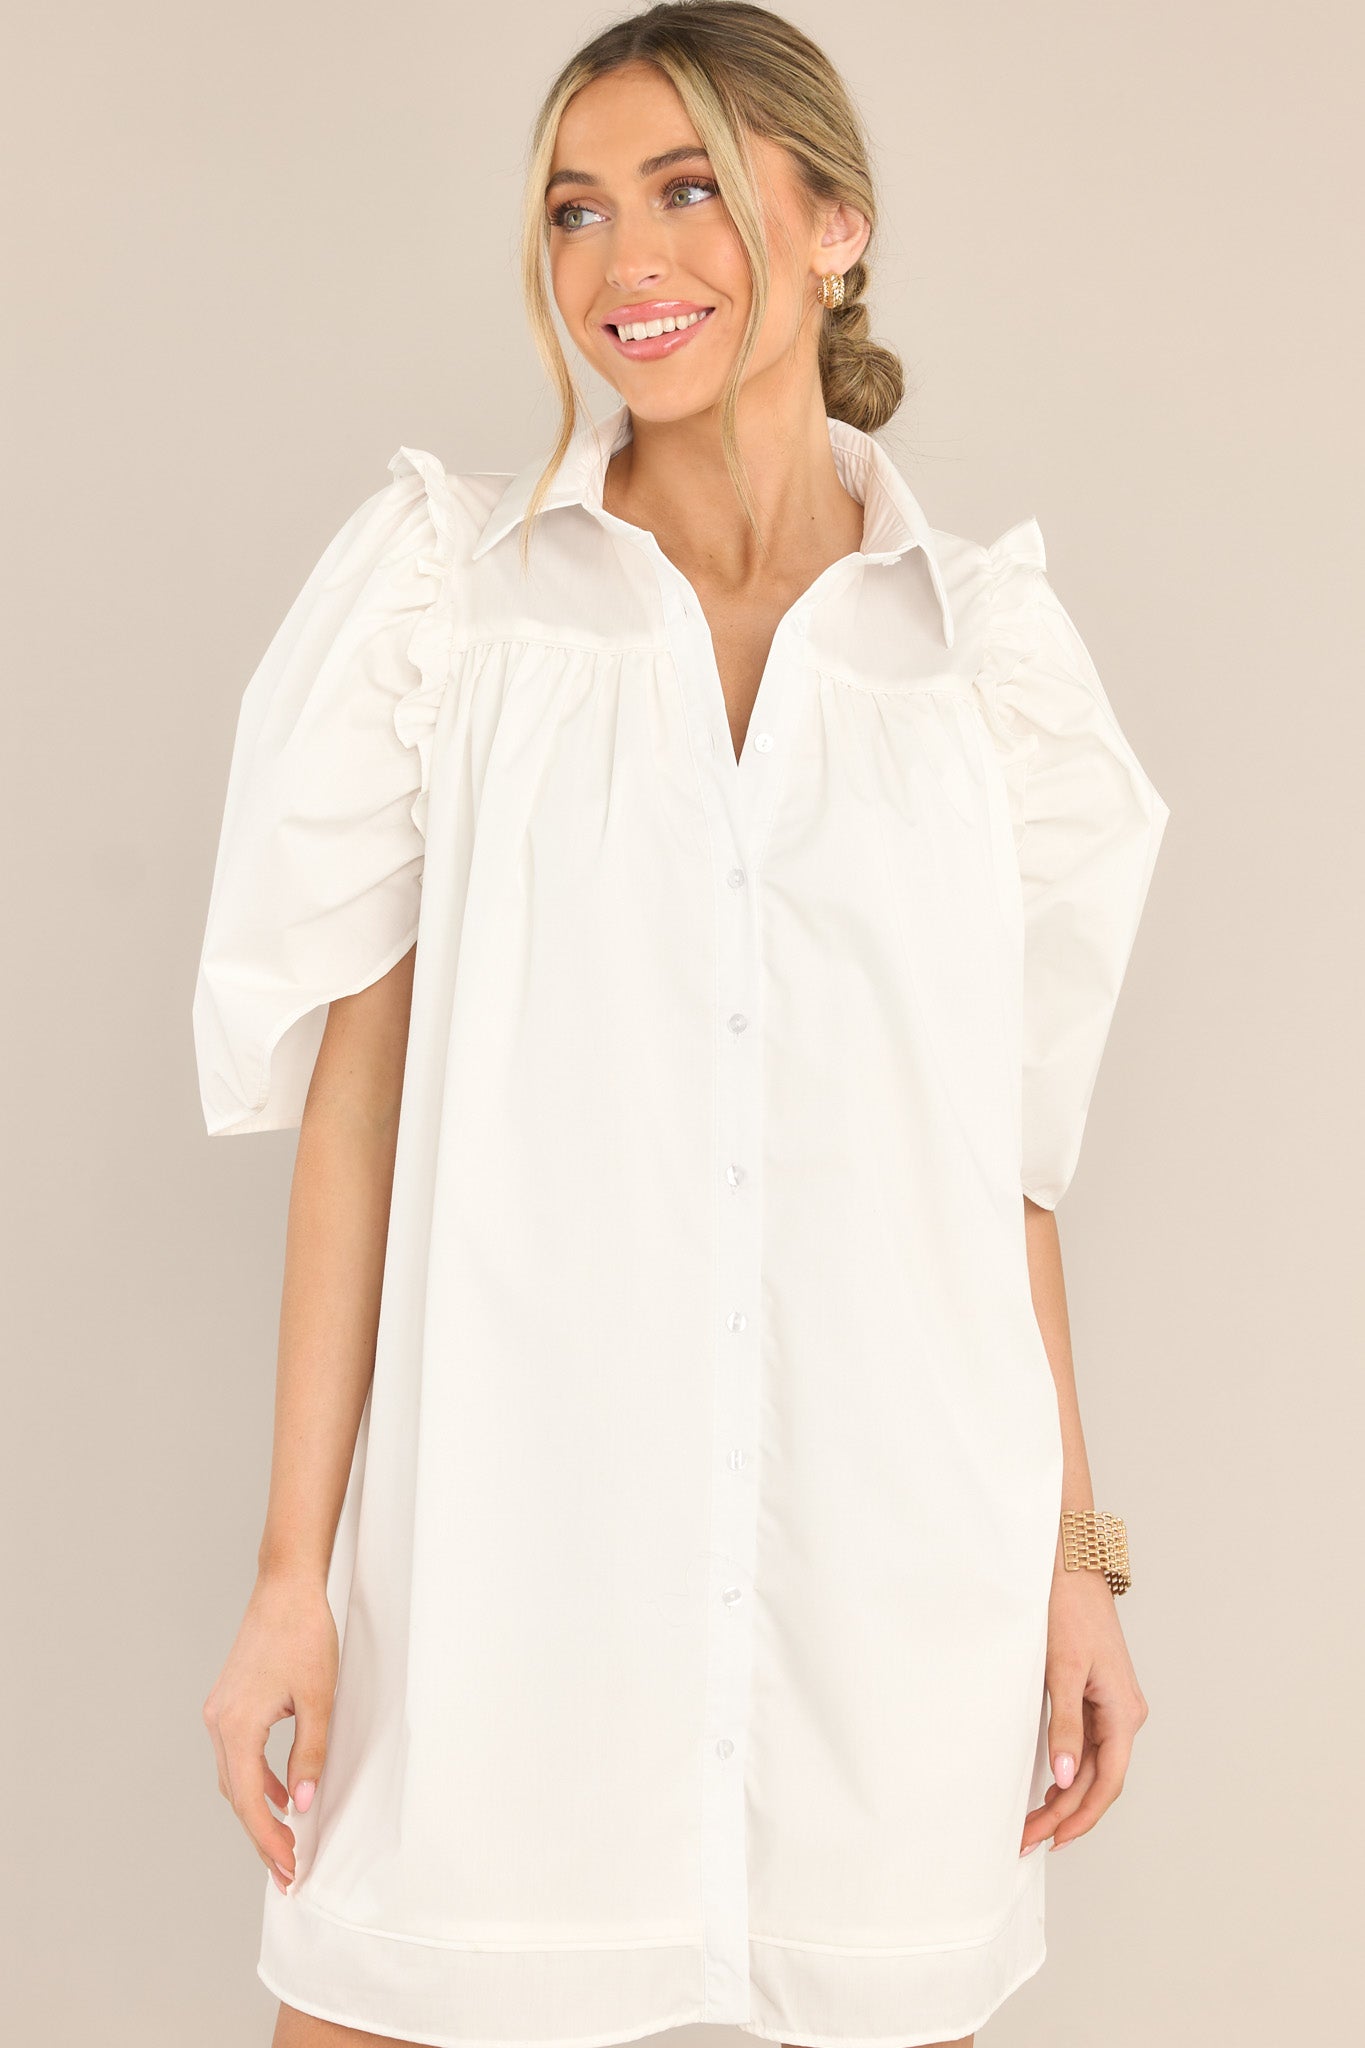 Front view of this dress that features a collared neckline, functional buttons down the front, butterfly short sleeves, and ruffle detailing.